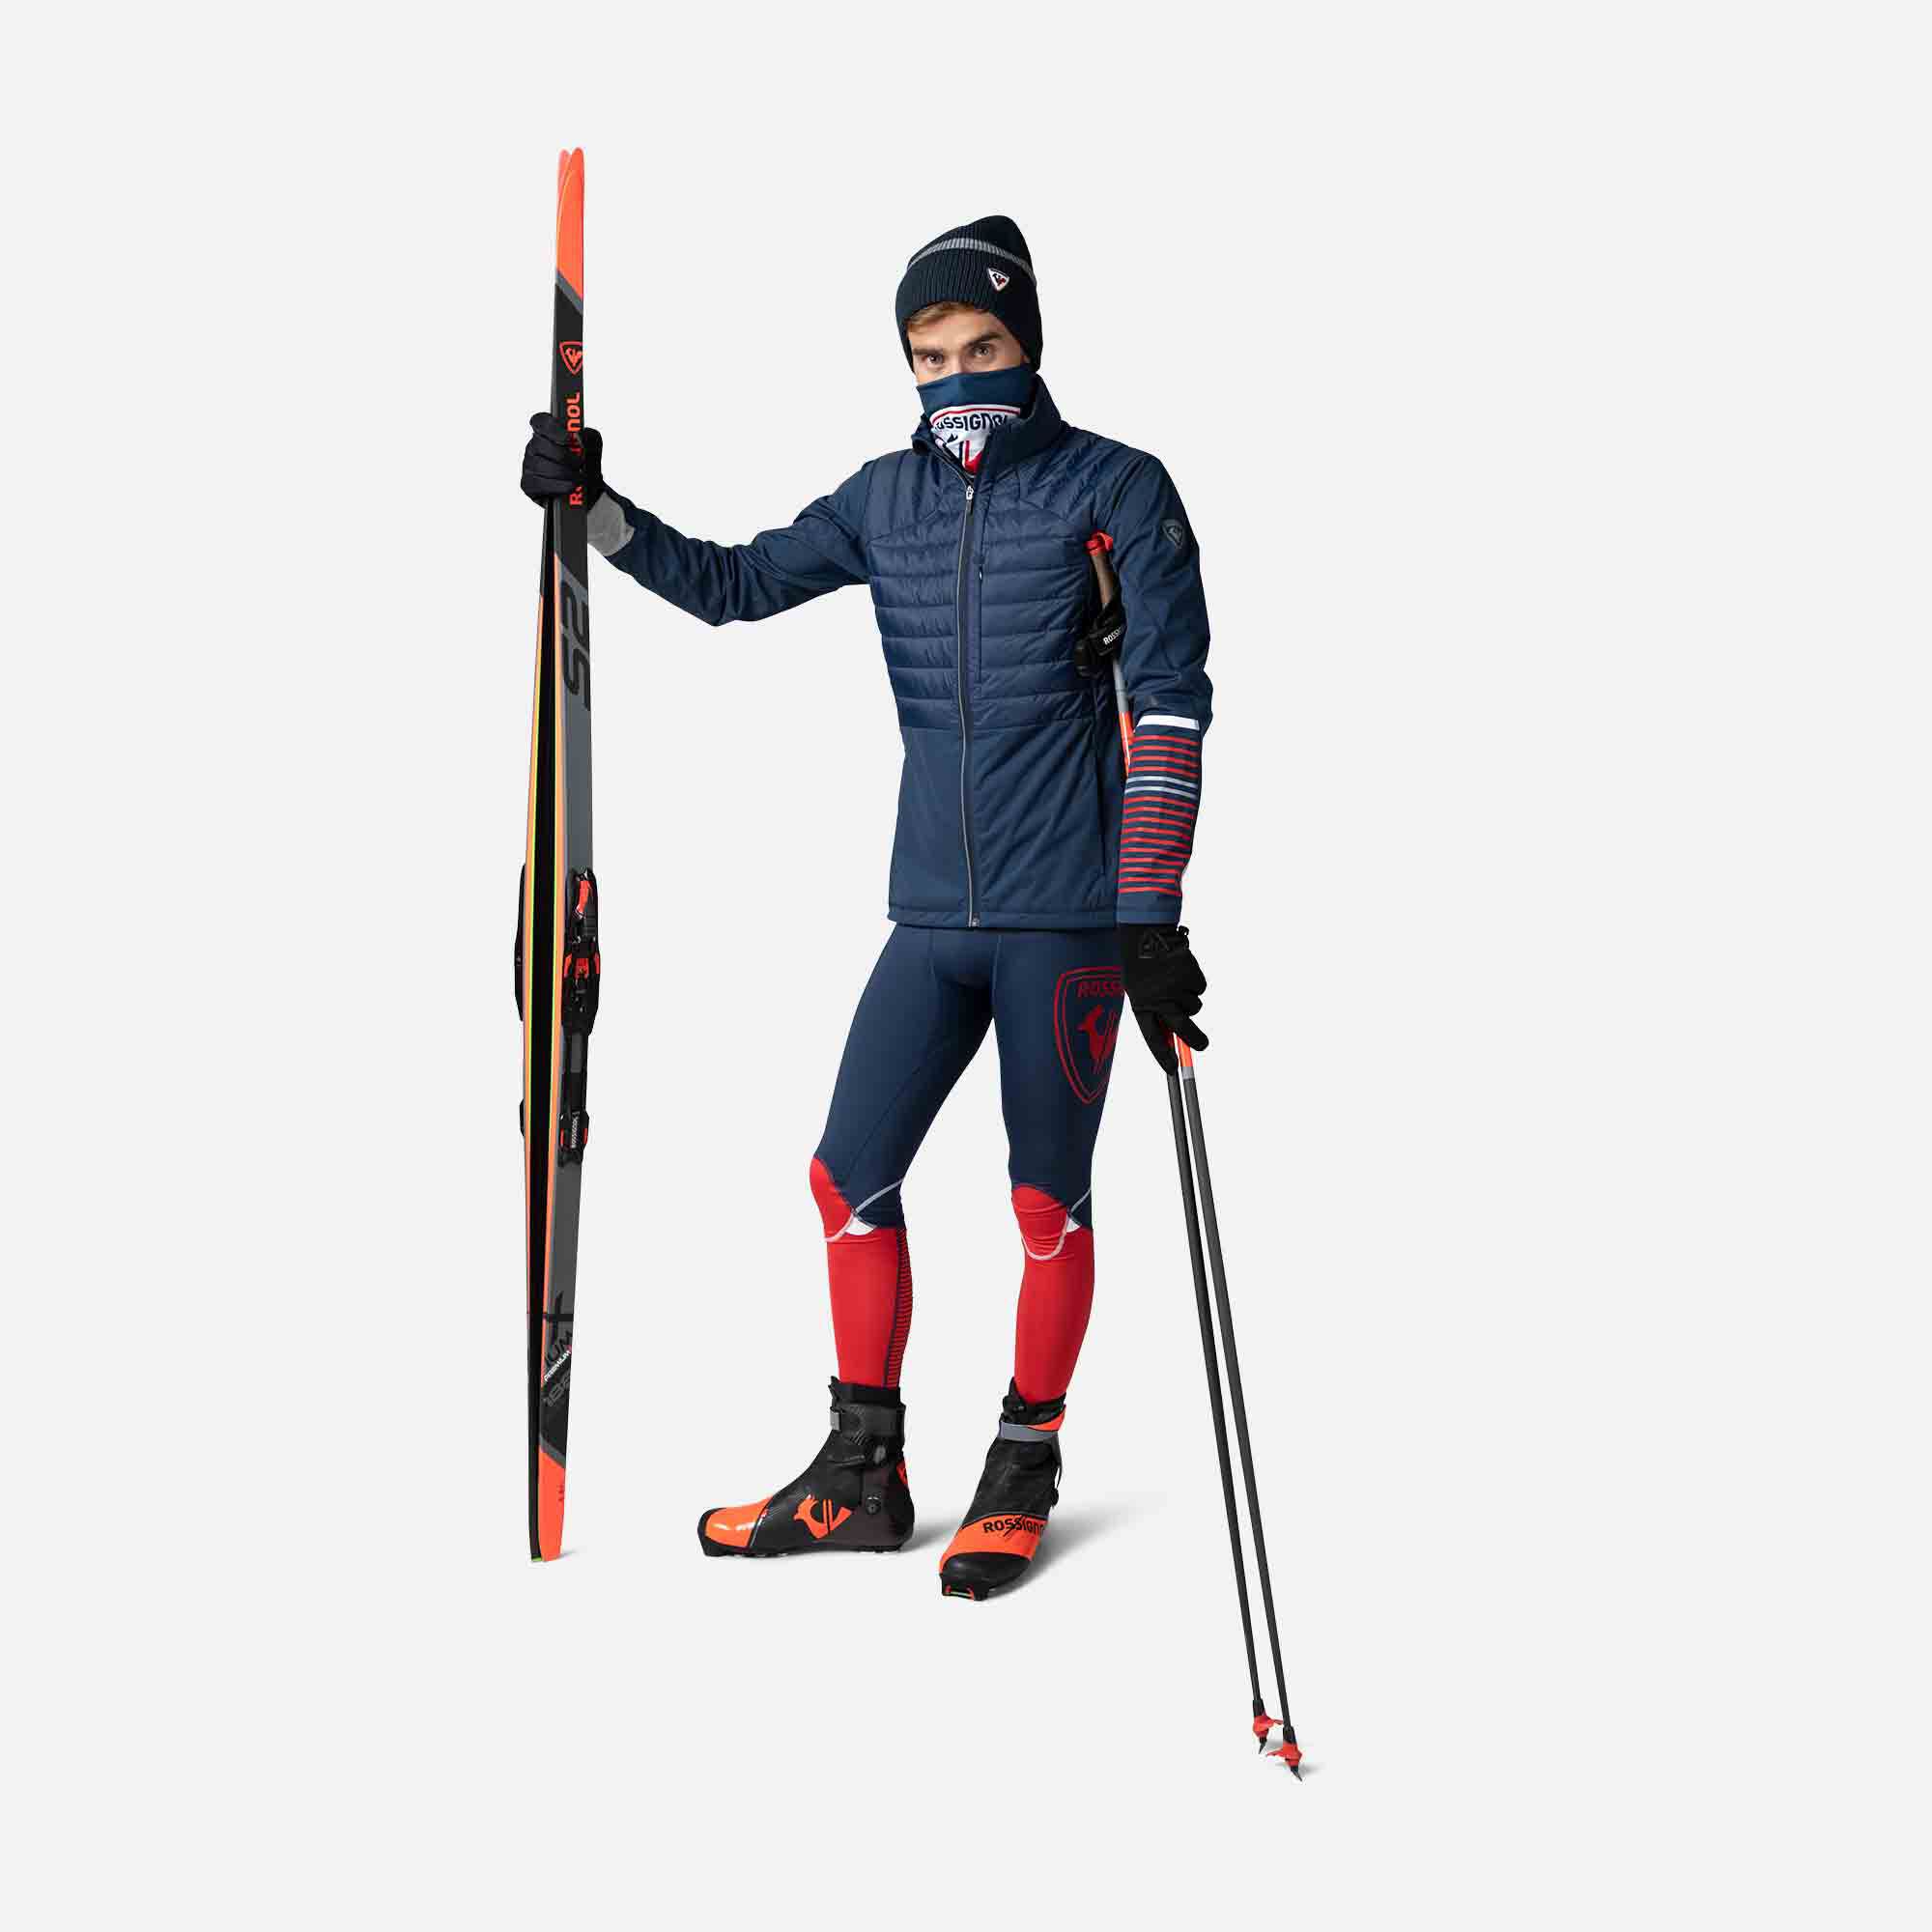 The Best Cross Country Ski Gear for the Whole Family  Chasing ADVNTR